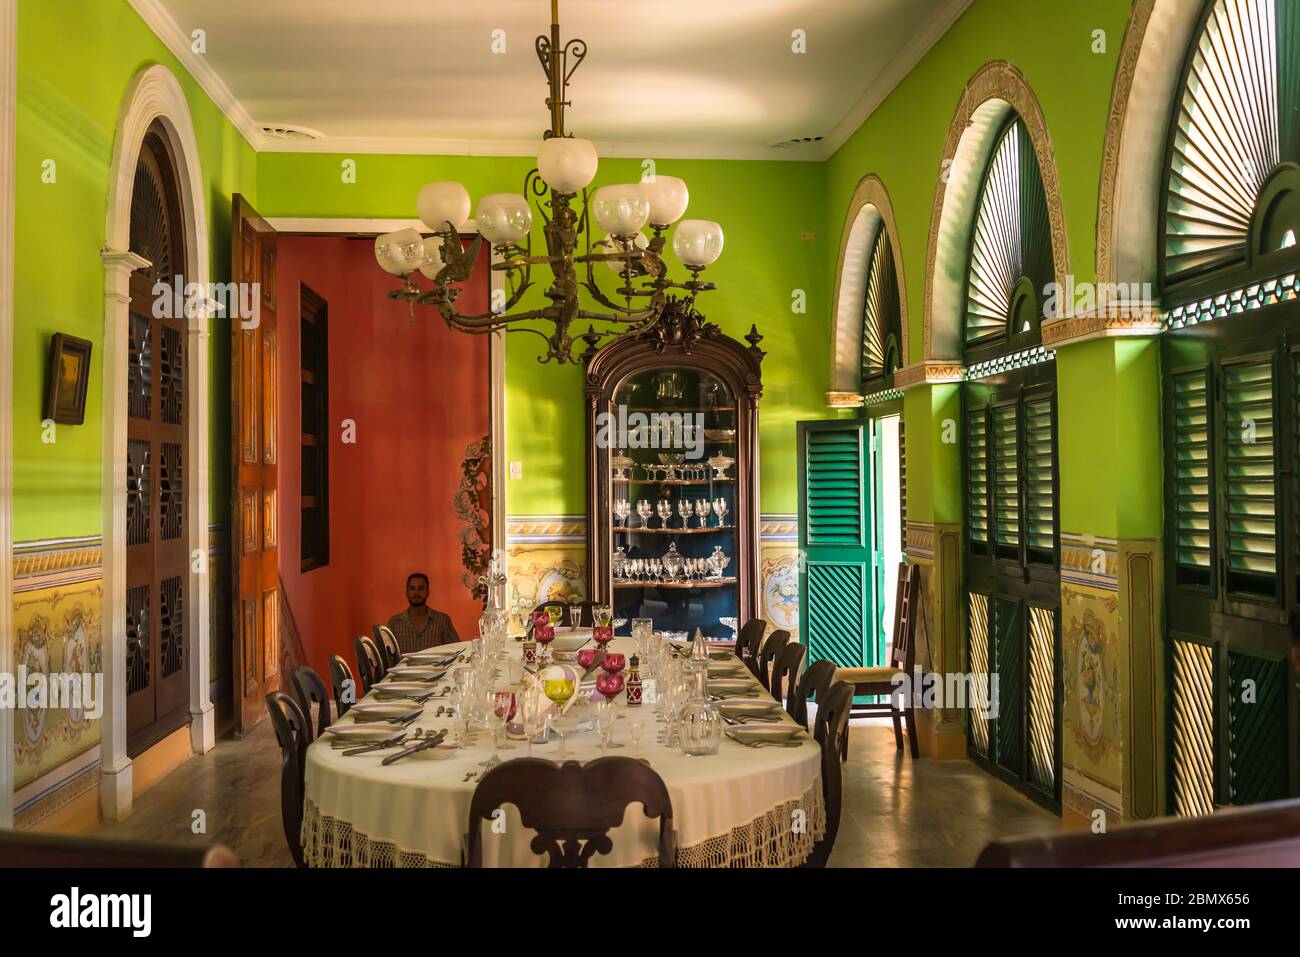 Dining room, Romantic Museum housed in the colonial era Brunet palace, Plaza Mayor, Trinidad, Cuba Stock Photo